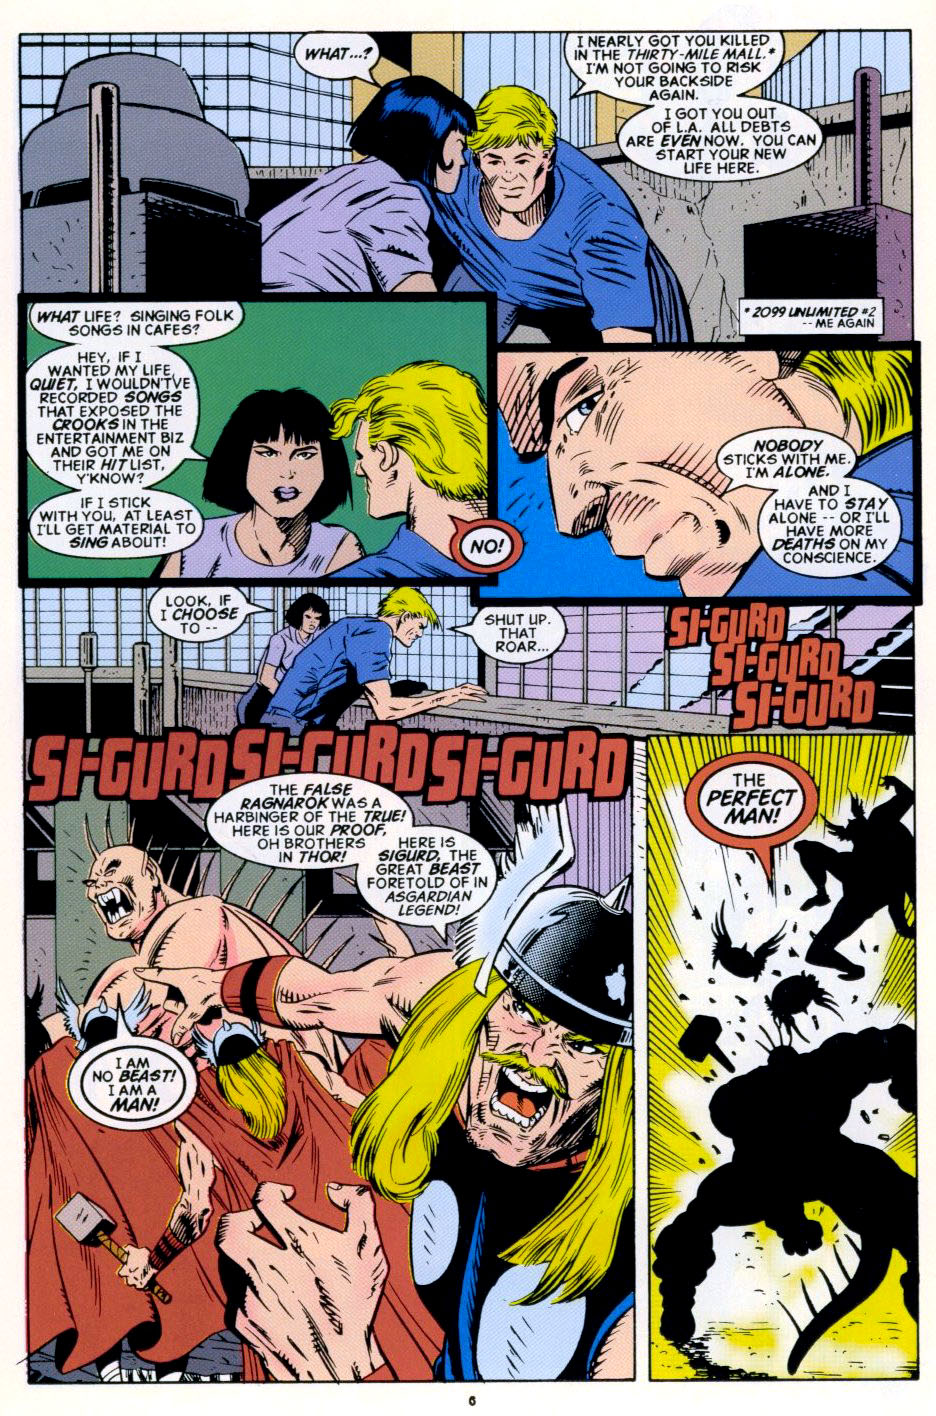 2099 Unlimited issue 4 - Page 6